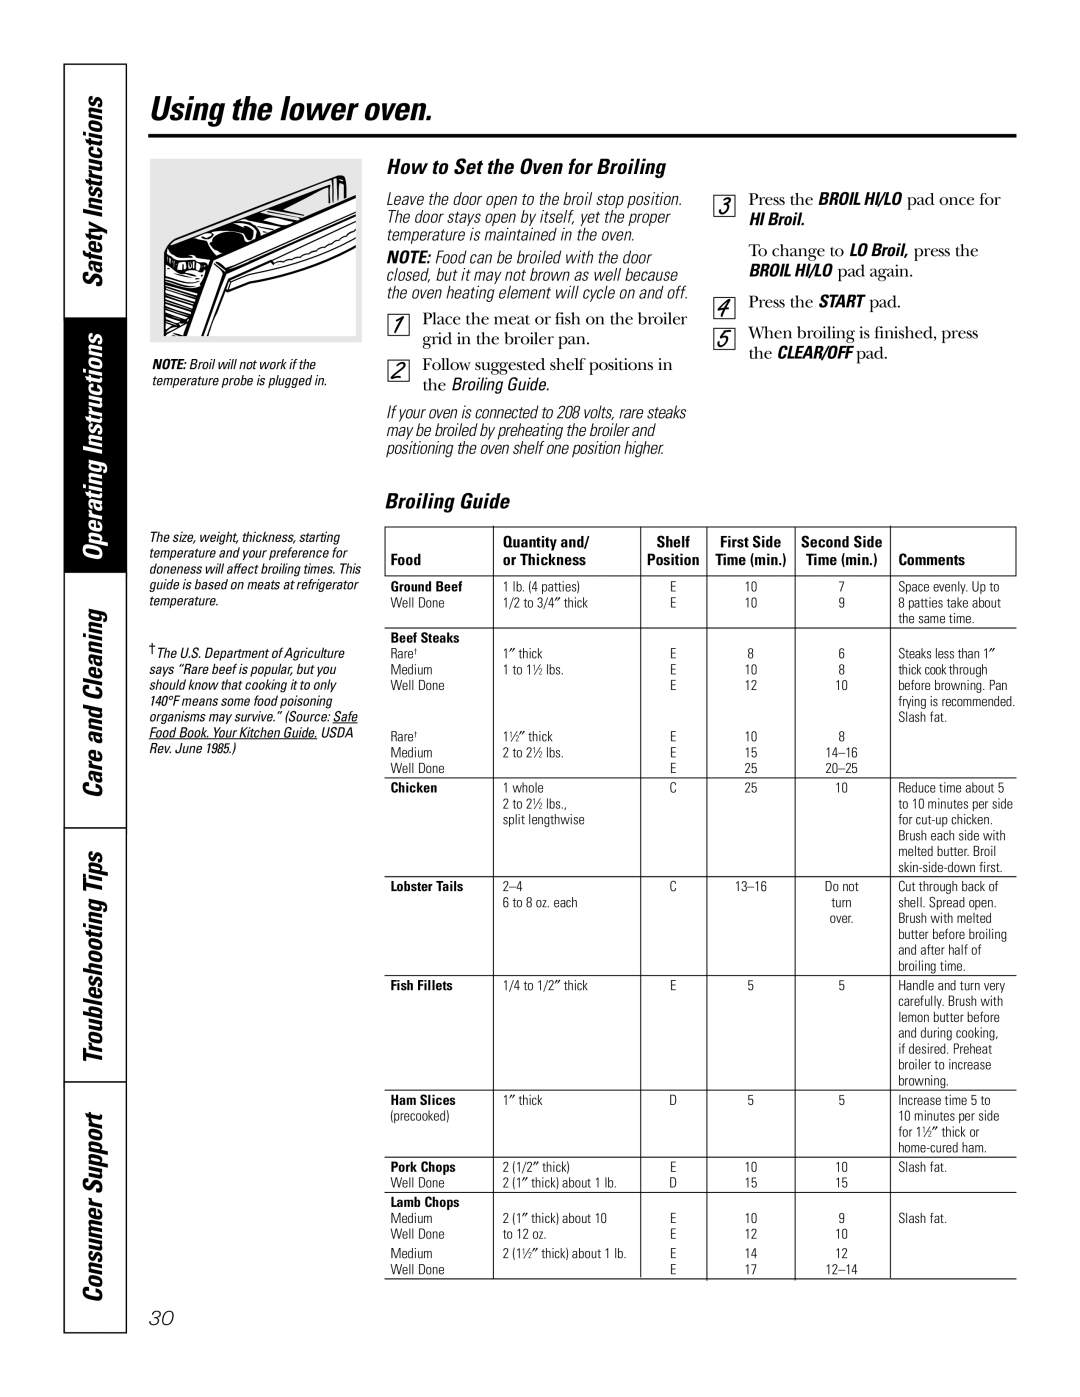 GE JT96530 Instructions Safety, Consumer Support Troubleshooting Tips Care and Cleaning Operating, Broiling Guide, Shelf 